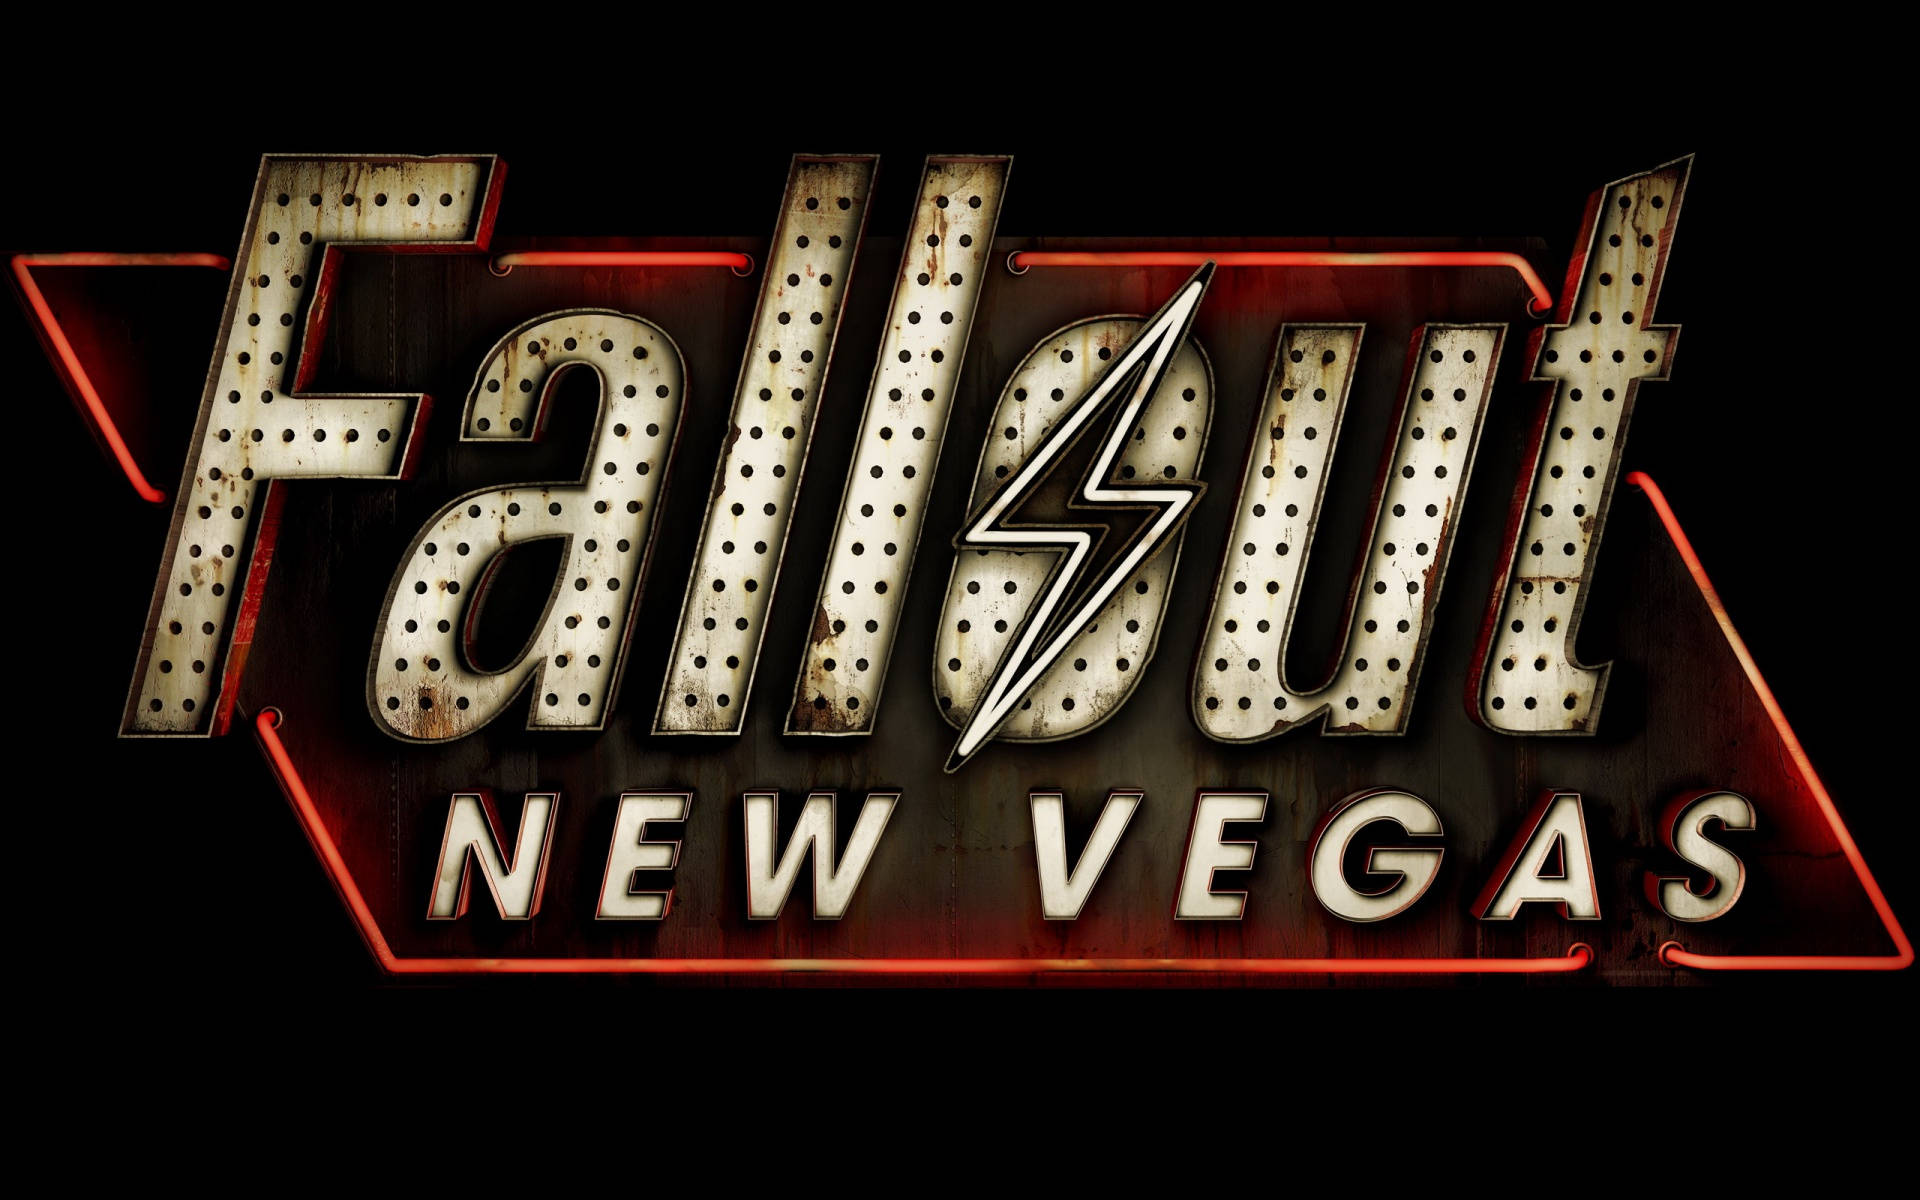 1920X1200 Fallout New Vegas Wallpaper and Background